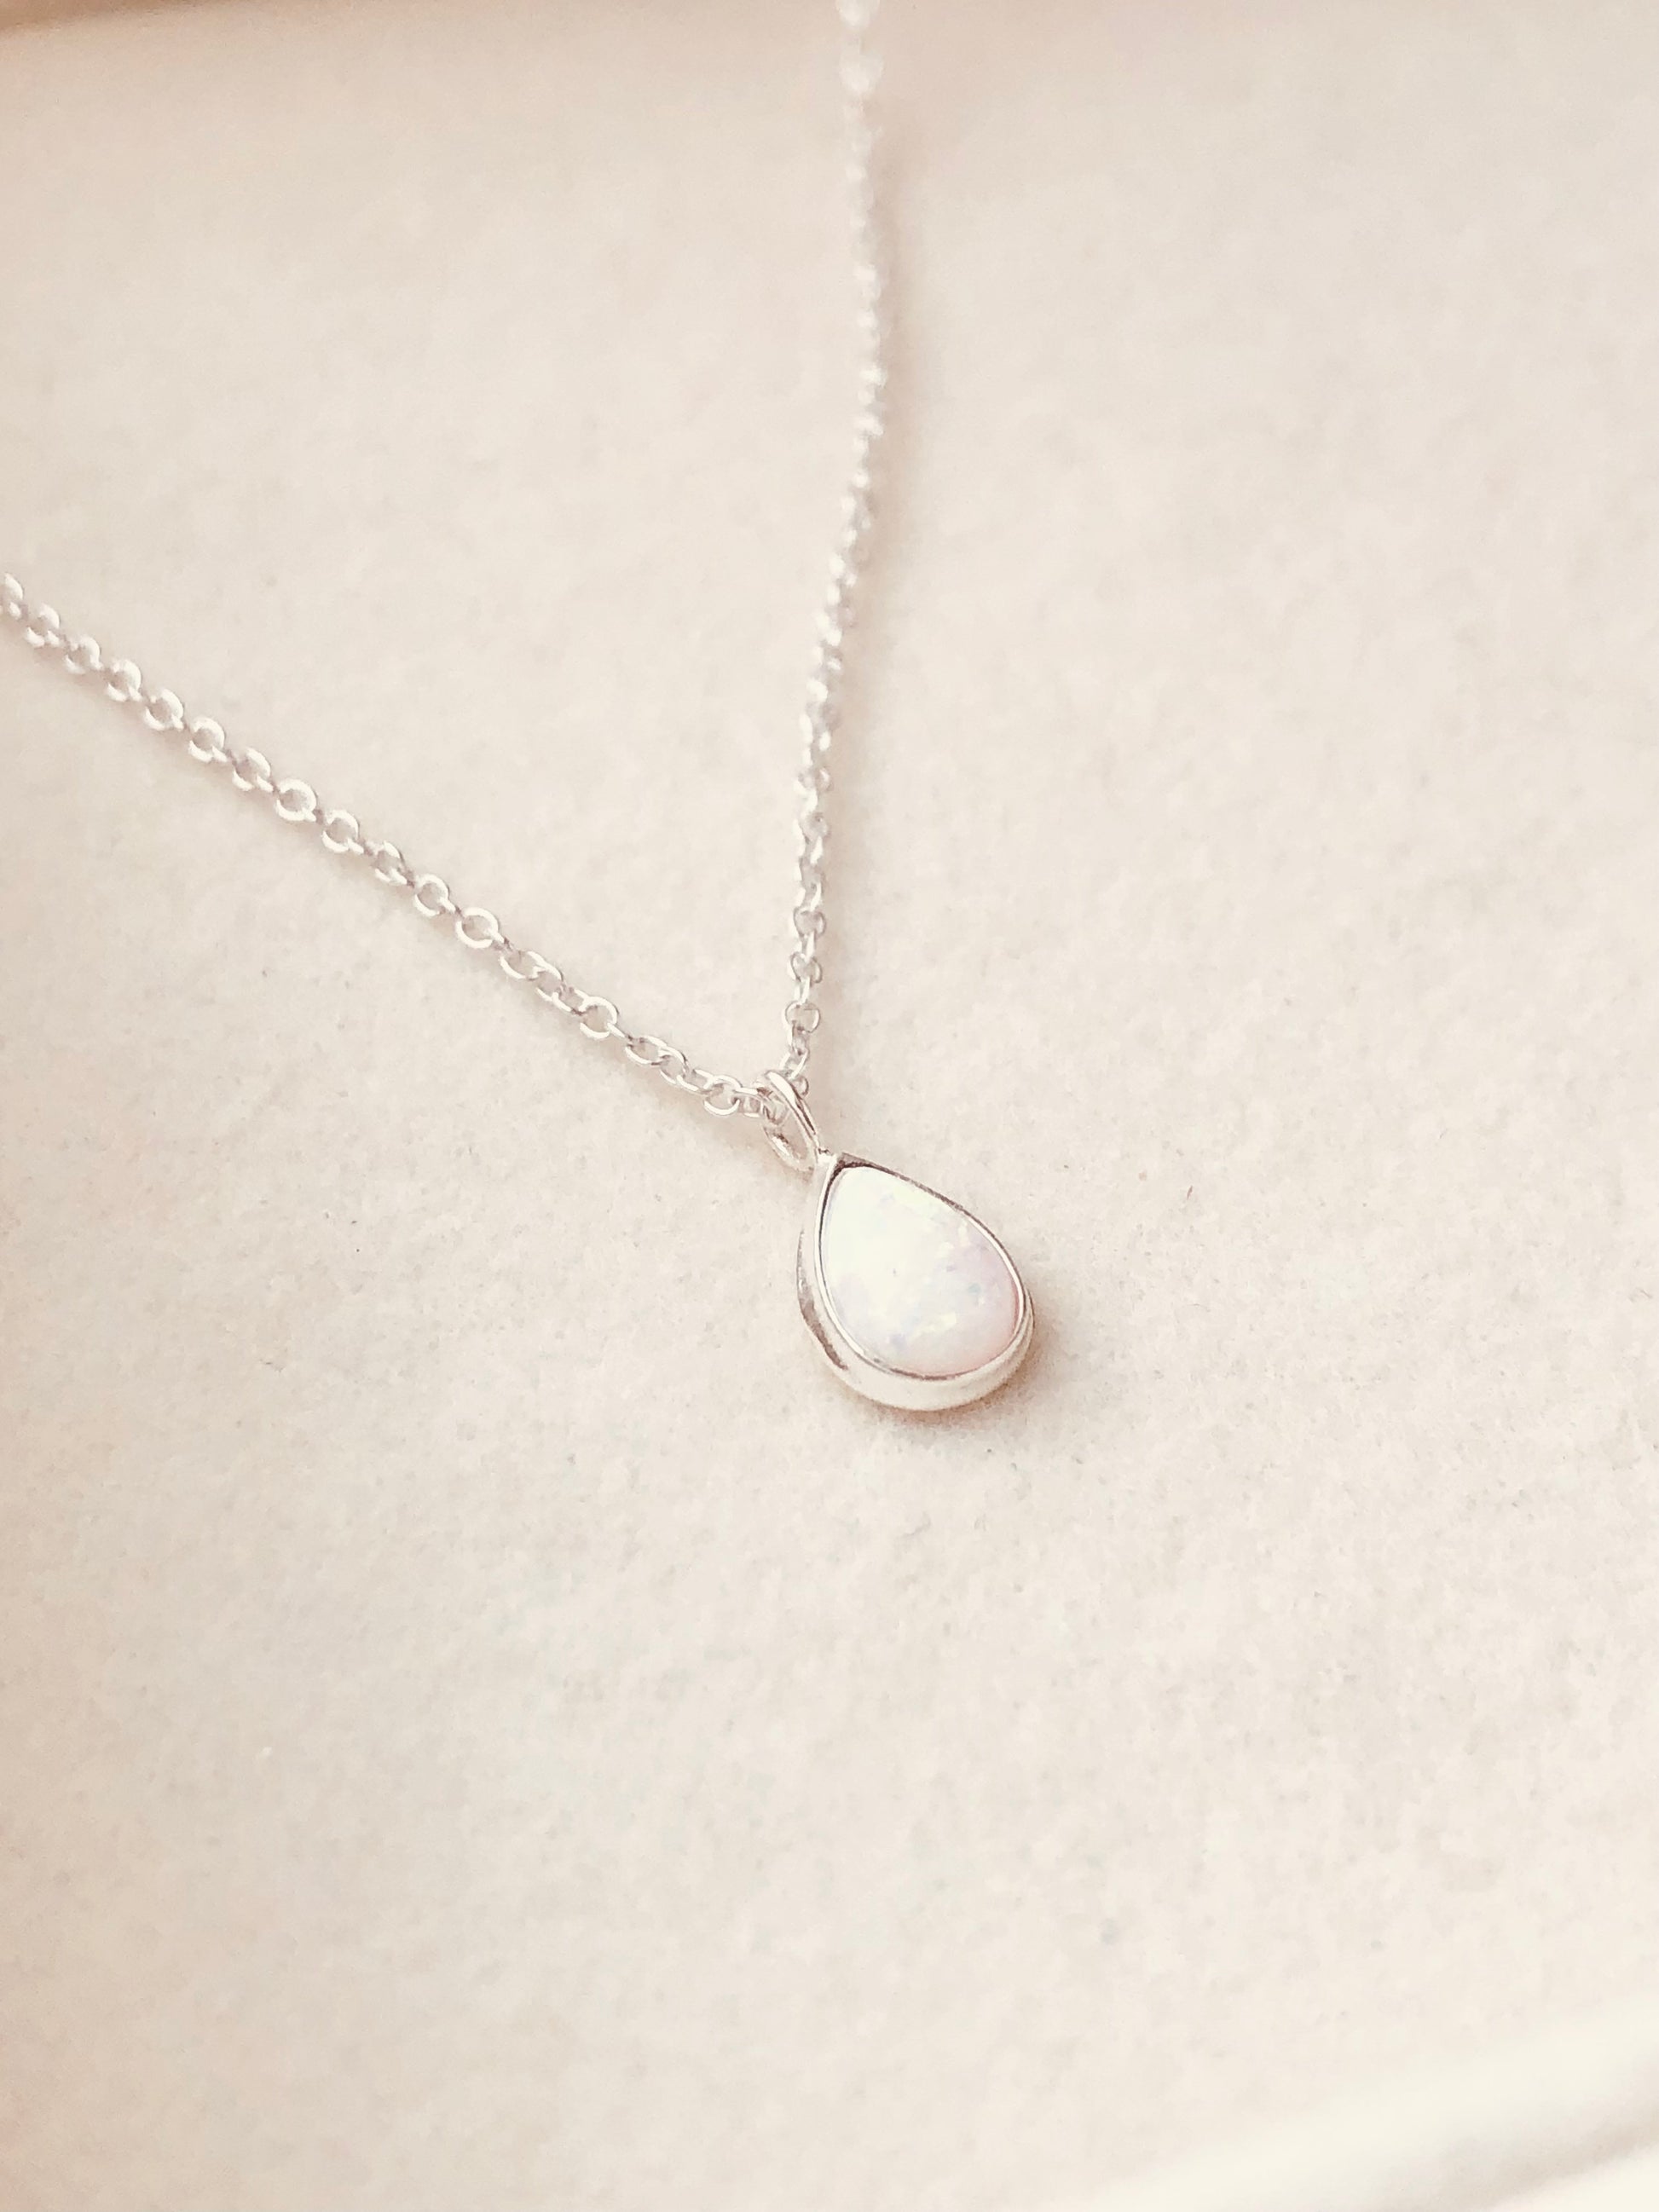 Teardrop Opal Necklace, White Opal Necklace, October Birthstone, Mini Opal Drop Necklace, Birthday Gift, Opal Jewelry, Mother’s Day Gifts